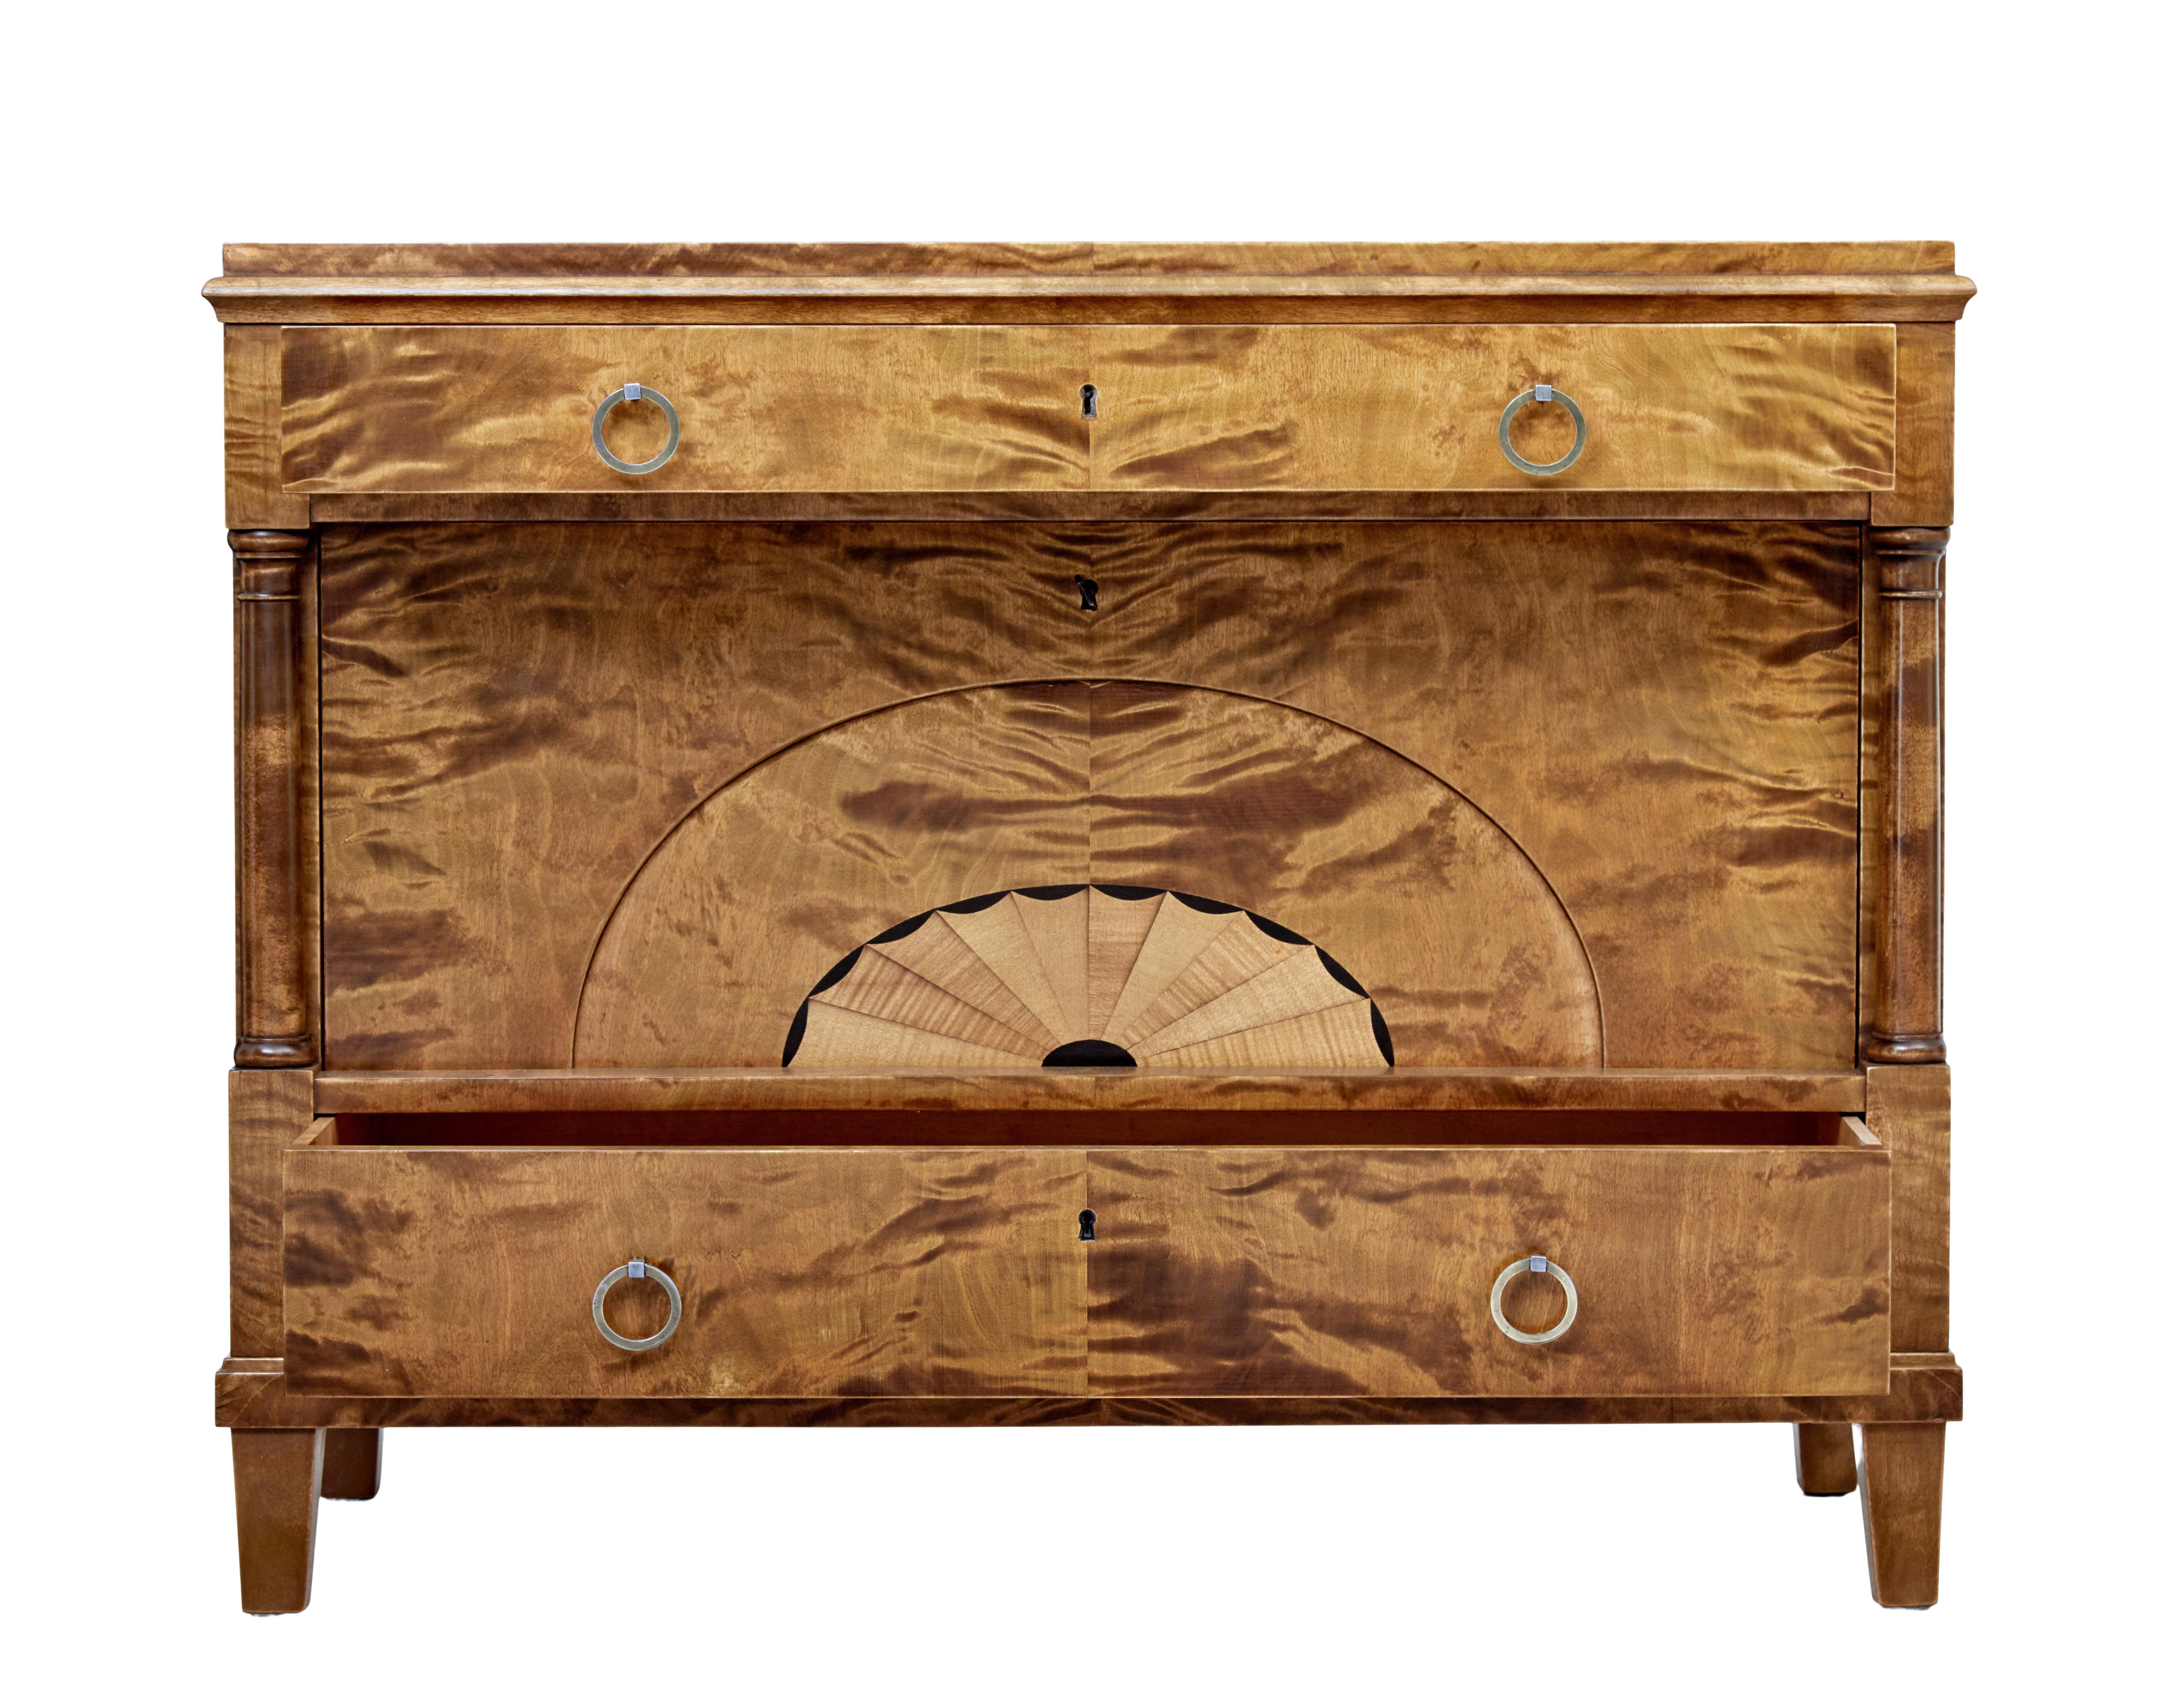 Swedish Early 20th Century Art Deco Inlaid Birch Chest of Drawers